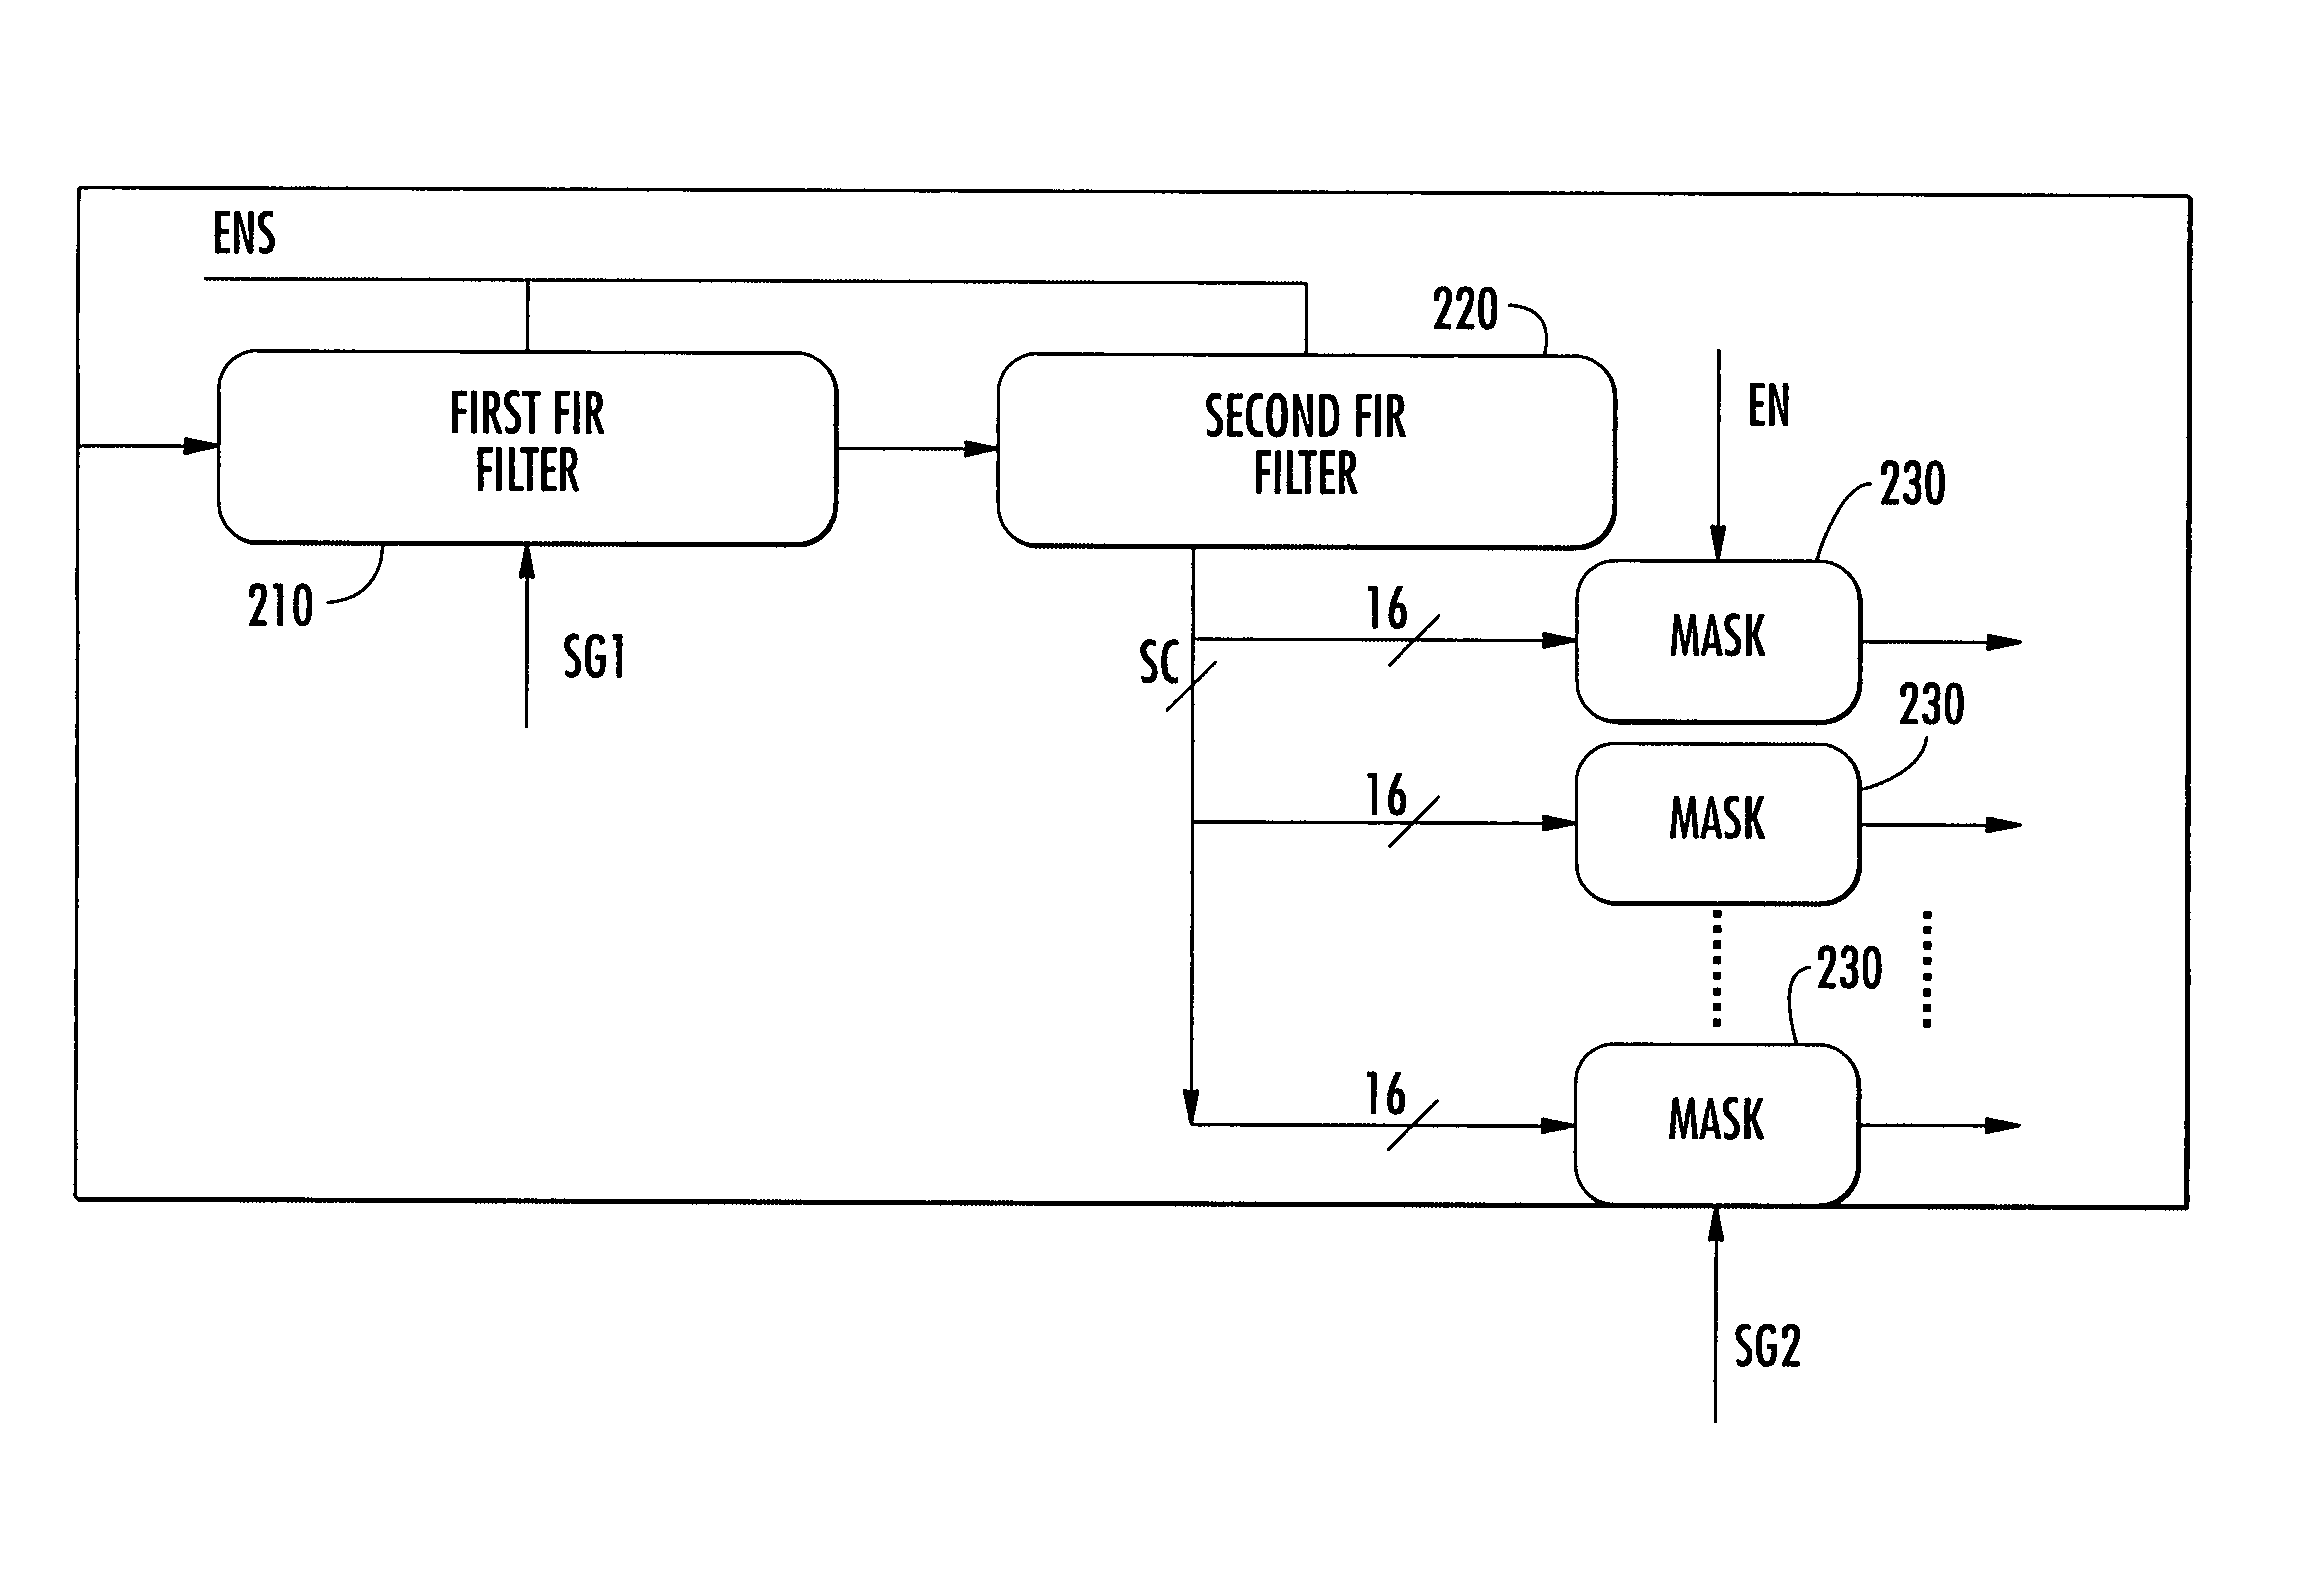 Process and device for synchronization and codegroup identification in cellular communication systems and computer program therefor